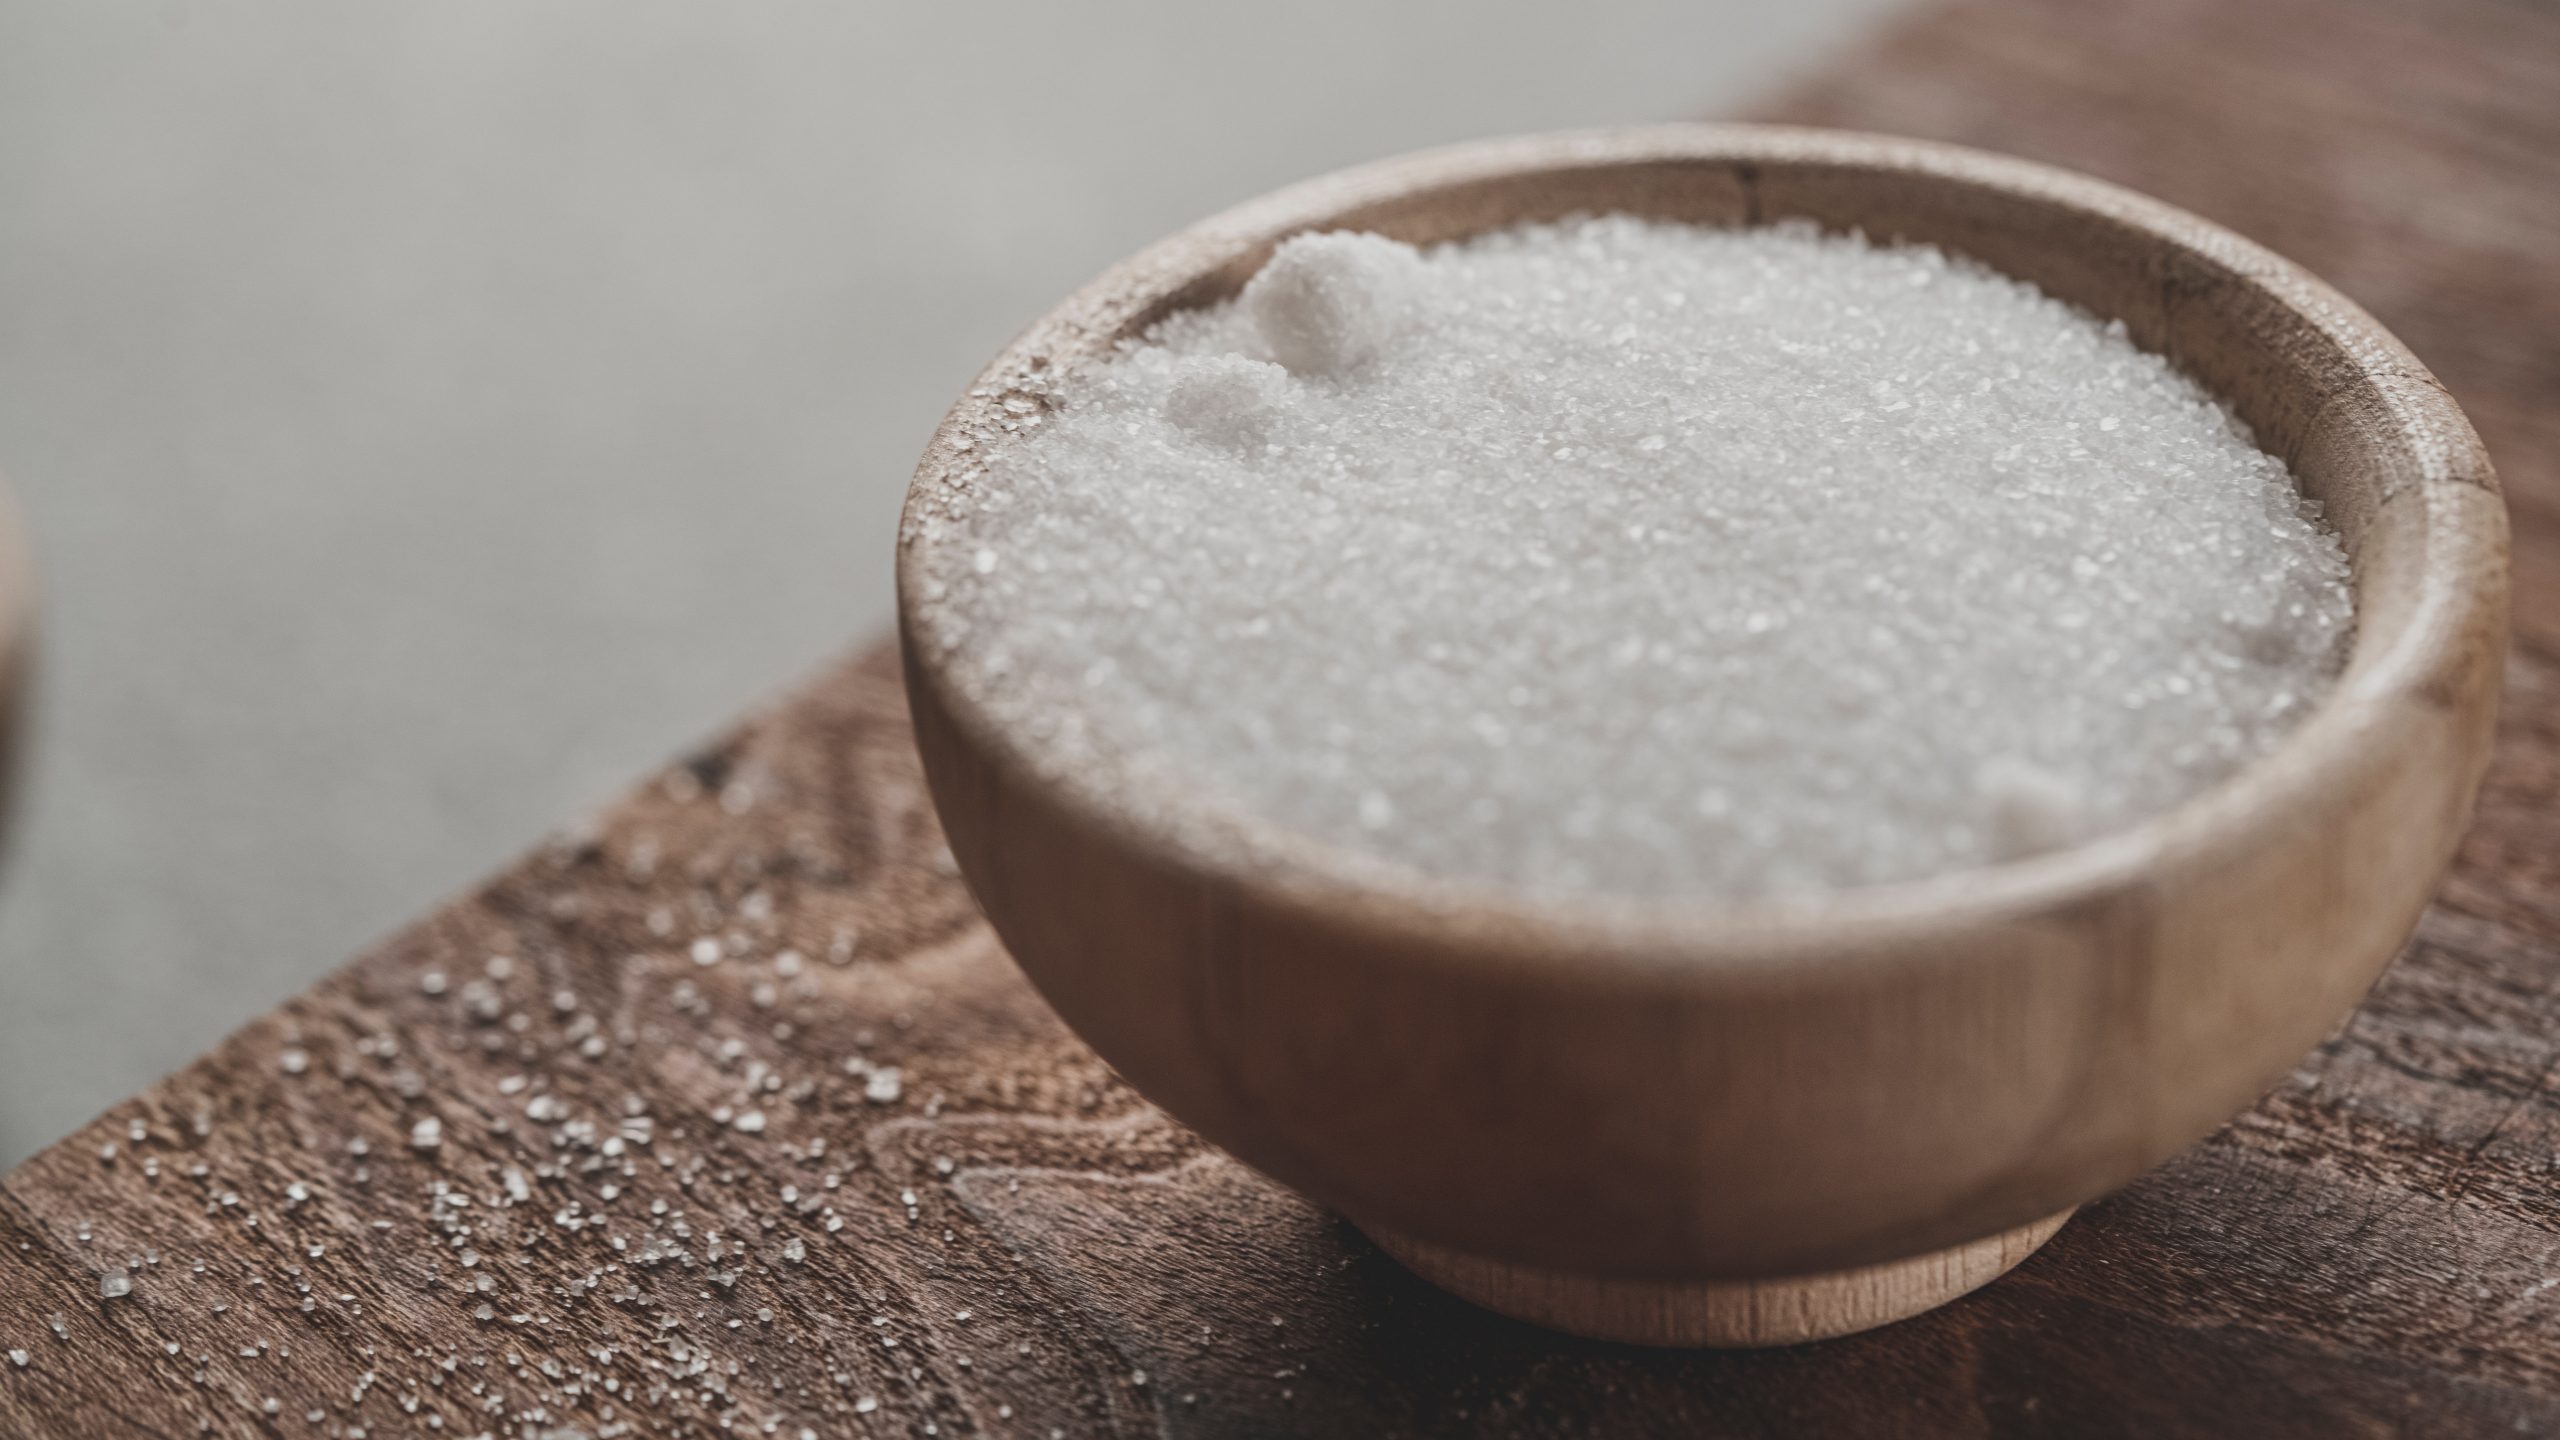 How to reduce sugar intake - 12 actionable tips